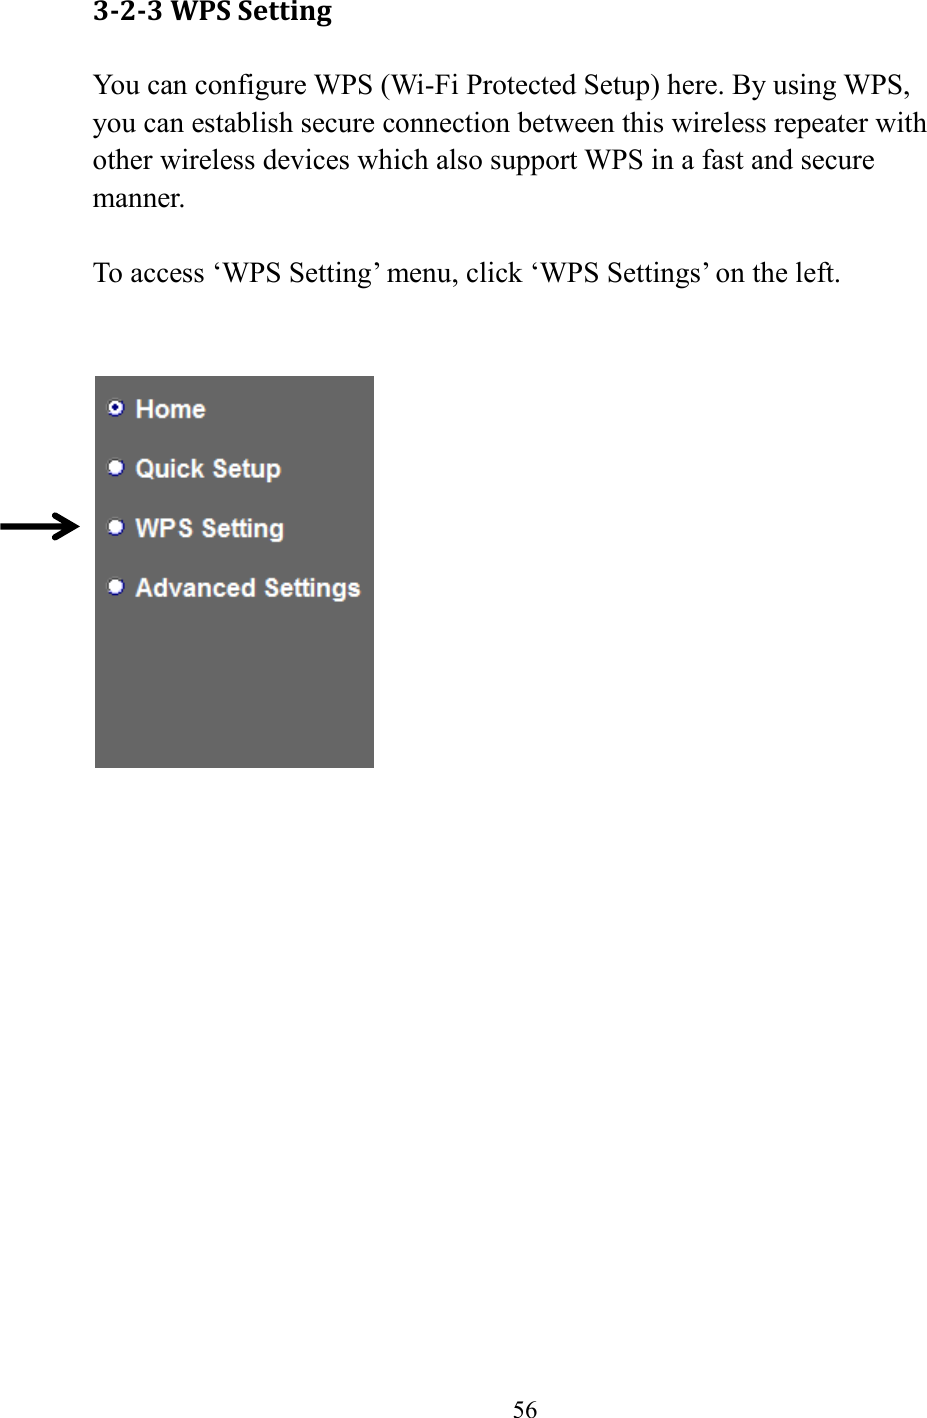  56  3-2-3 WPS Setting You can configure WPS (Wi-Fi Protected Setup) here. By using WPS, you can establish secure connection between this wireless repeater with other wireless devices which also support WPS in a fast and secure manner.  To access ‘WPS Setting’ menu, click ‘WPS Settings’ on the left.    